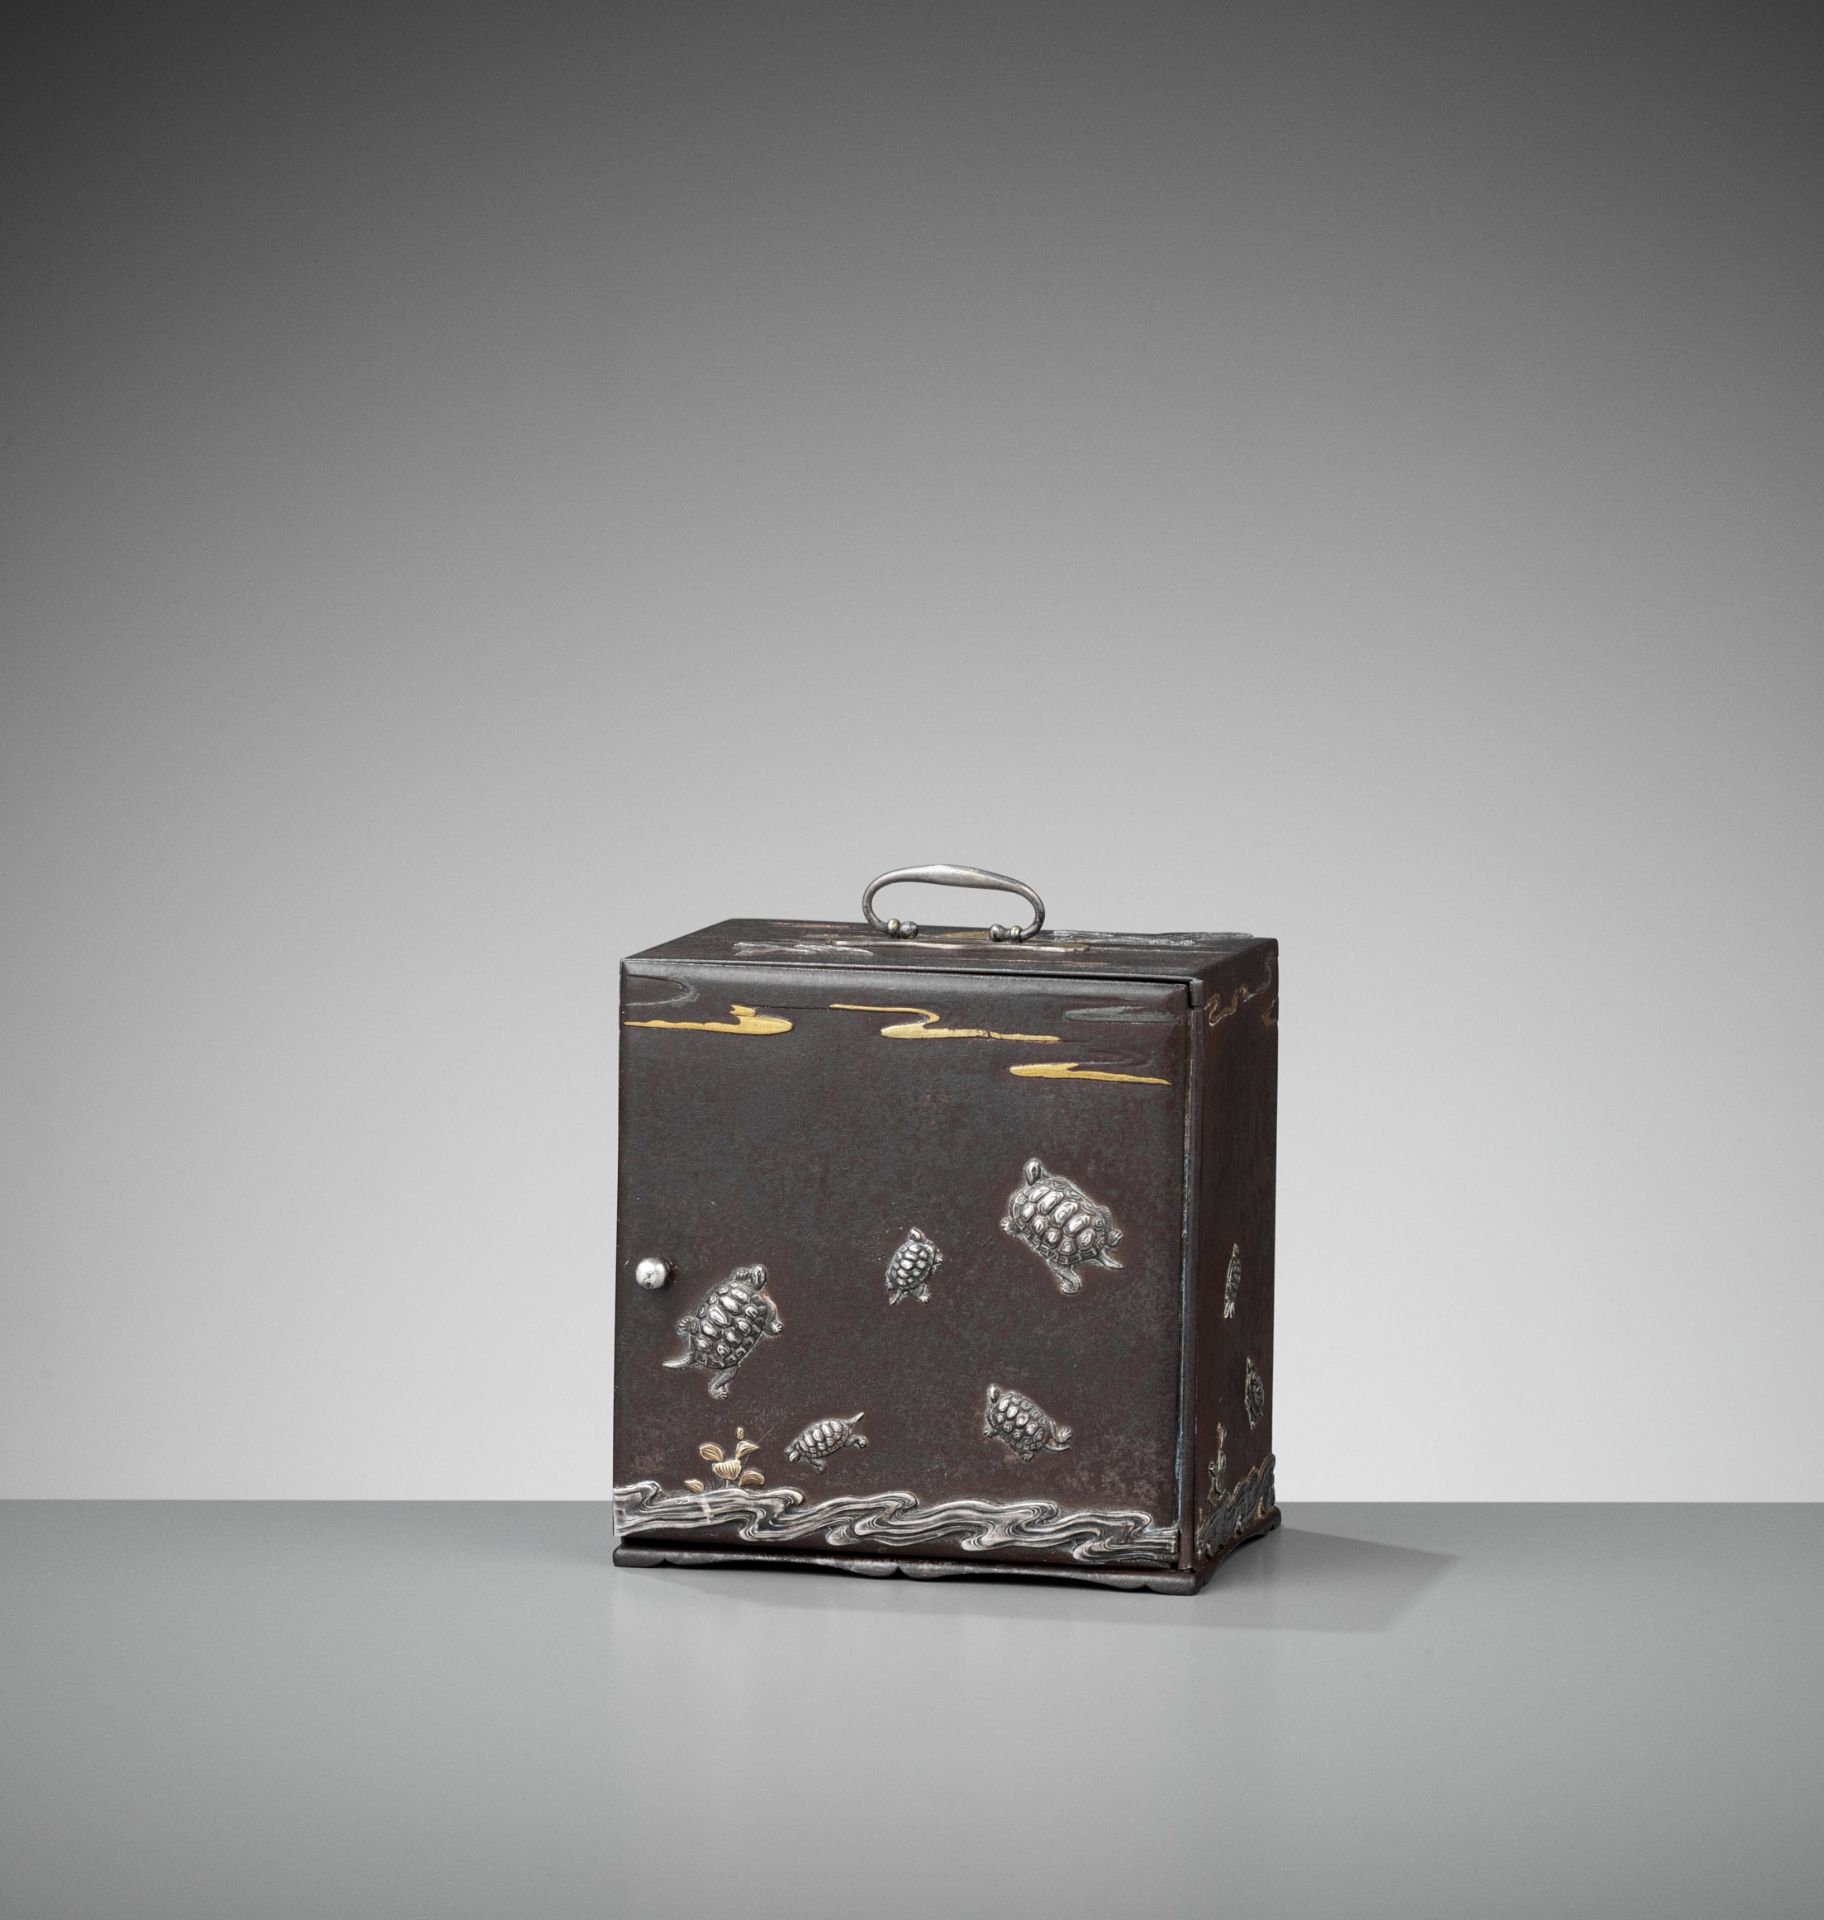 AN EXCEPTIONALLY RARE INLAID IRON MINIATURE KODANSU (CABINET) WITH TURTLES AND CRANES - Image 5 of 11